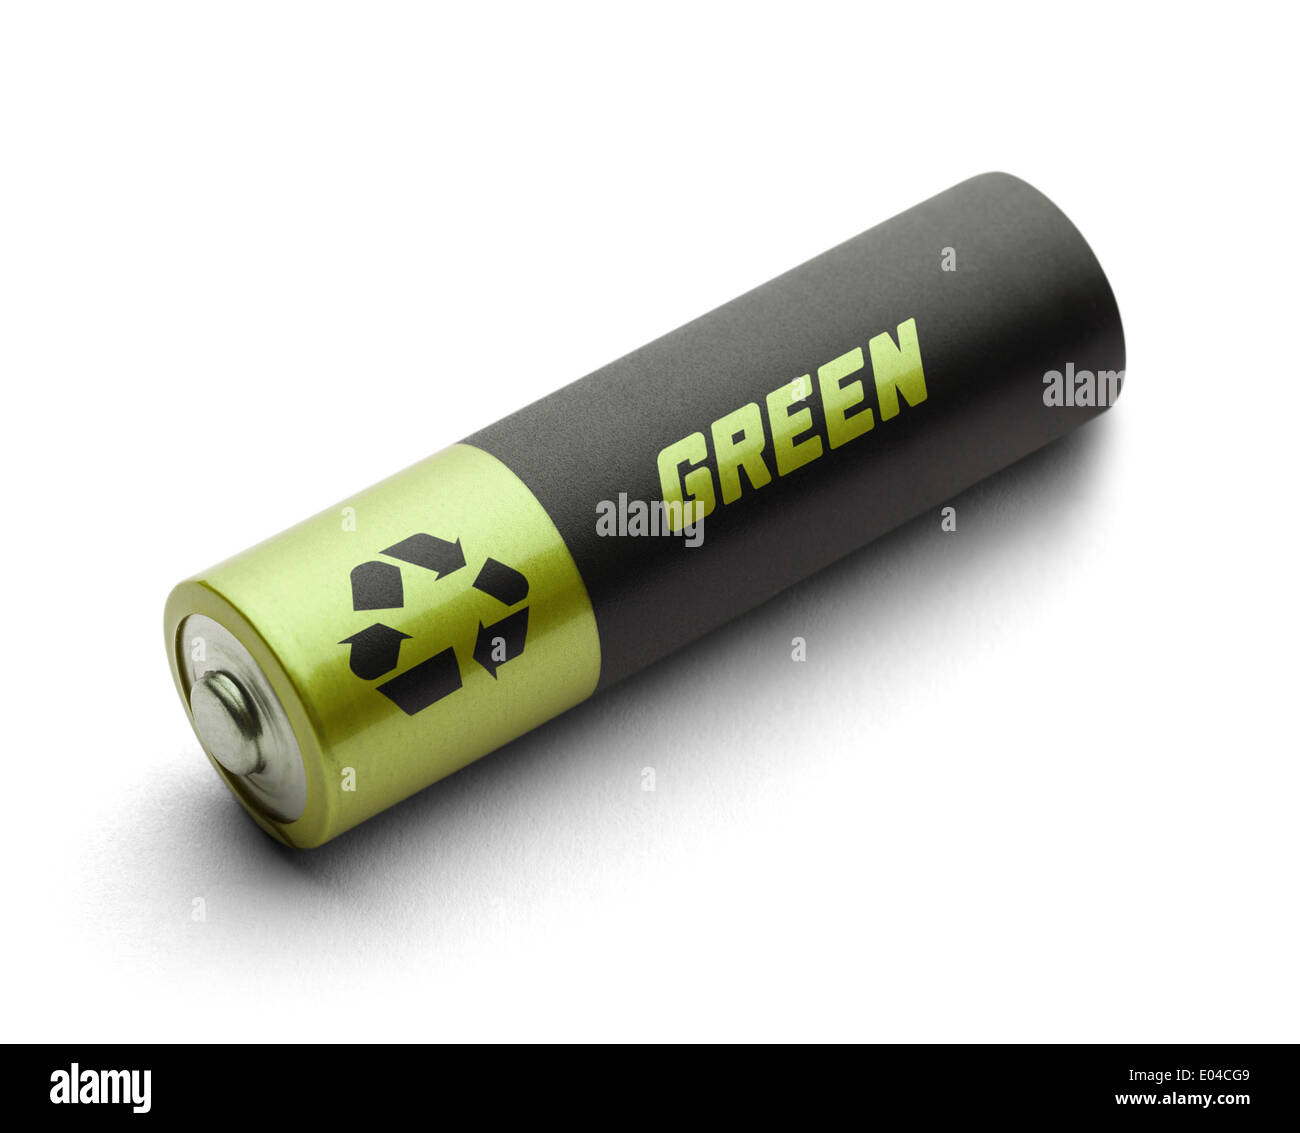 Battery with recycle symbol and Green on it Isolated on a White Background. Stock Photo